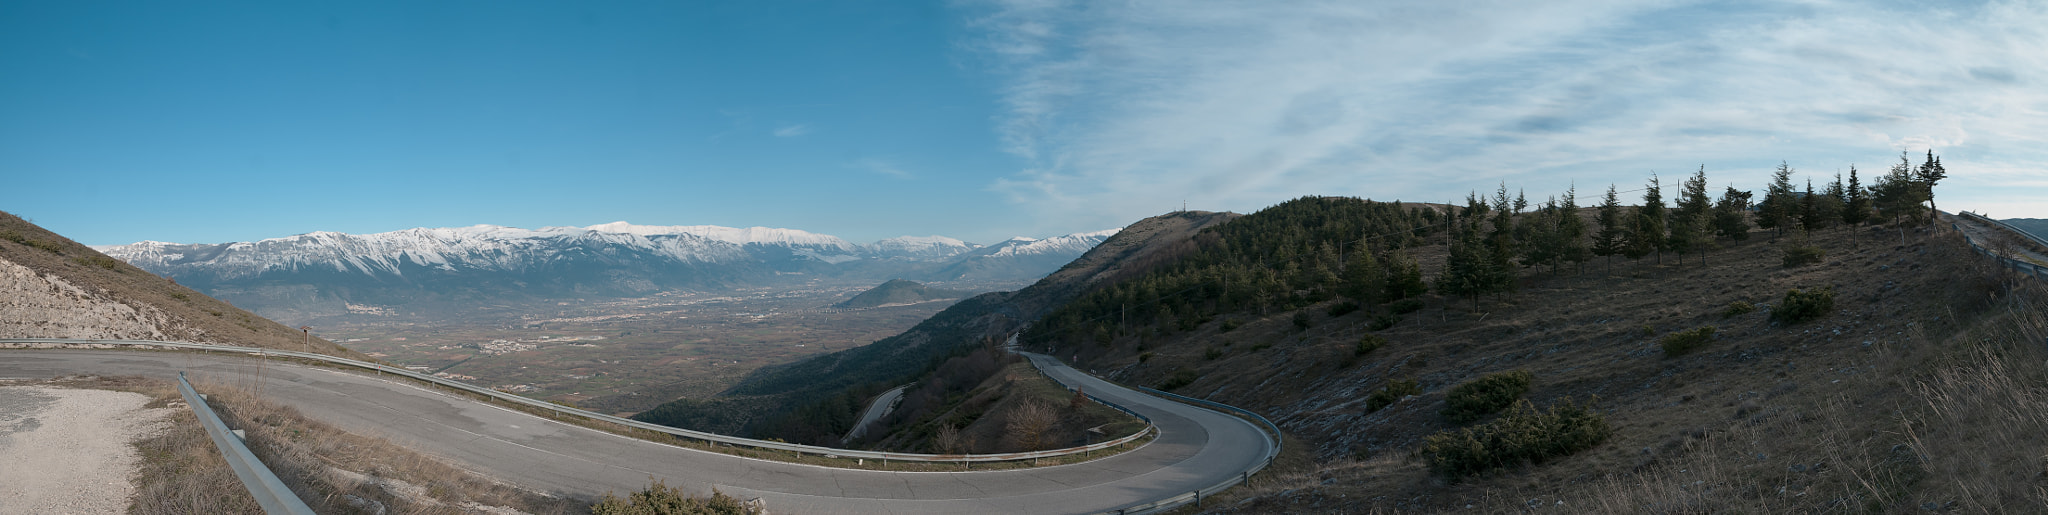 Nikon D80 + Tamron SP AF 17-50mm F2.8 XR Di II VC LD Aspherical (IF) sample photo. Sirente valley panorama photography